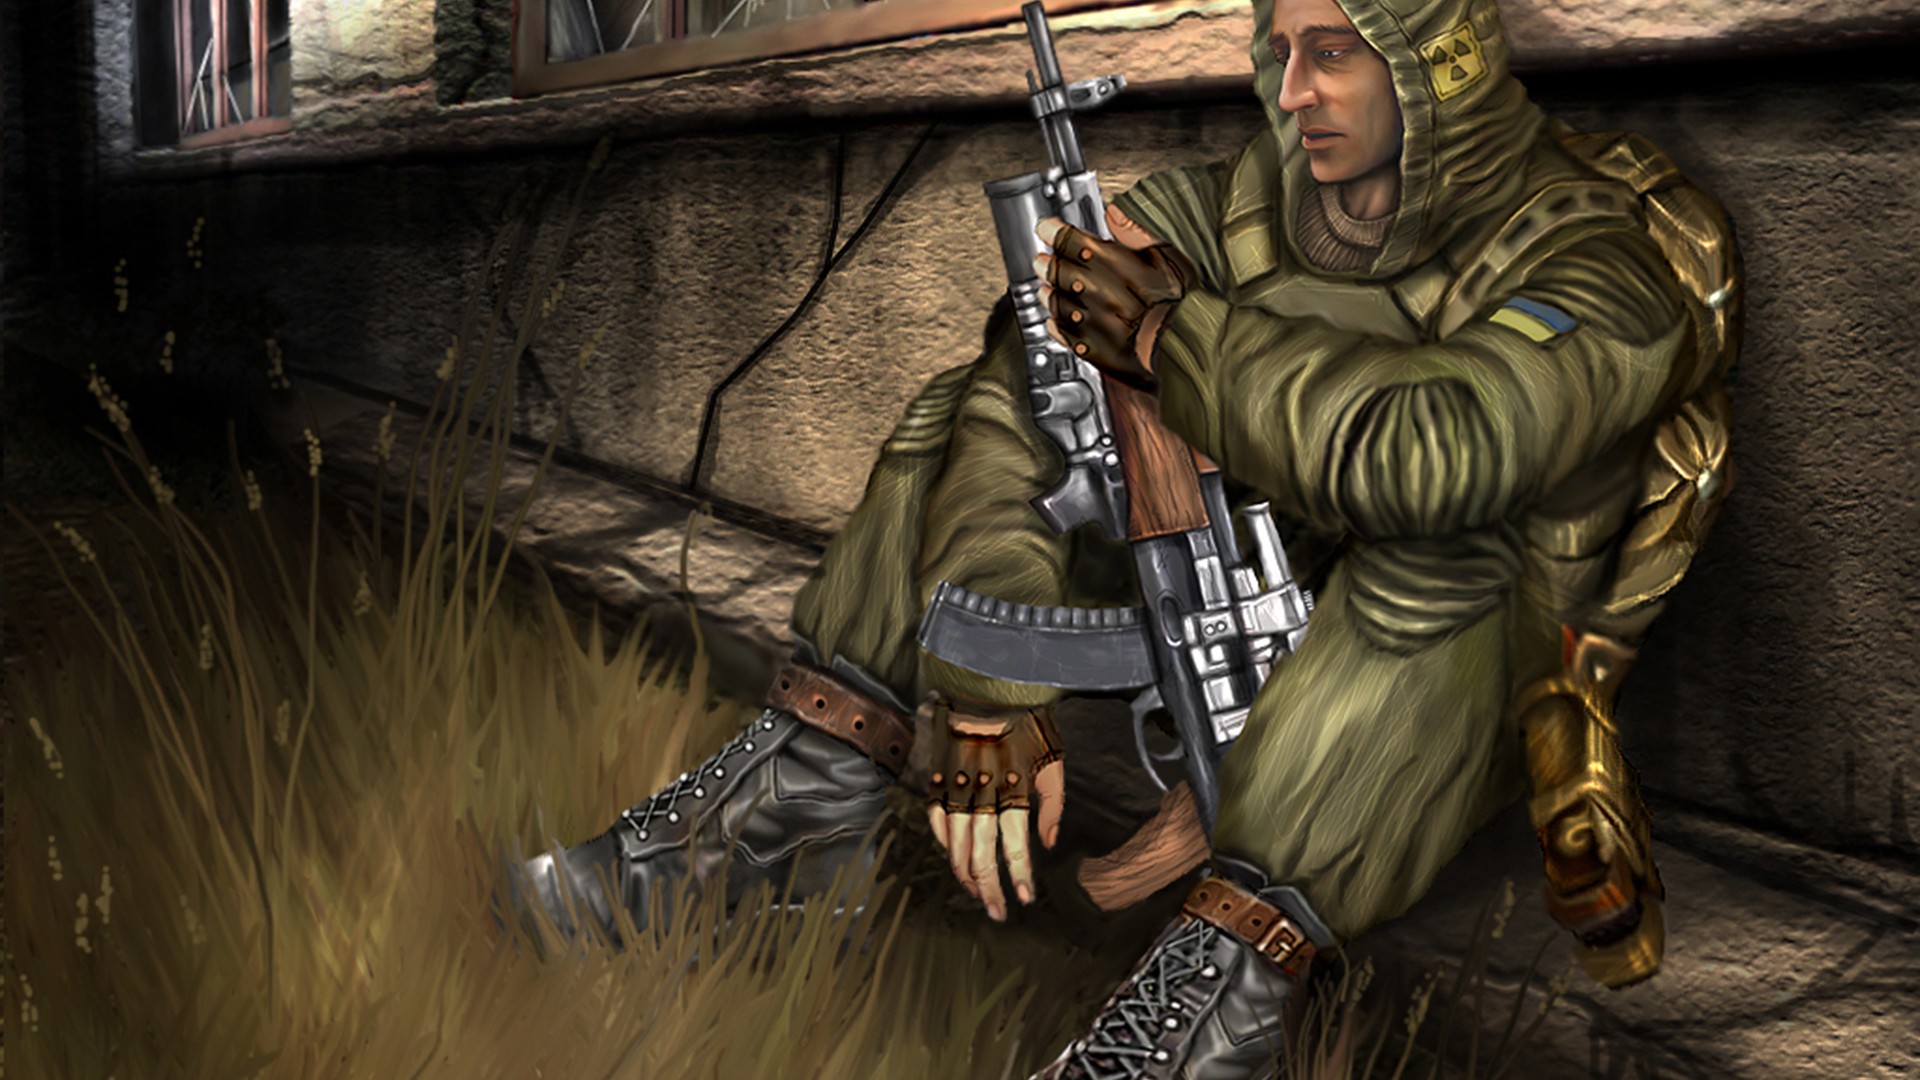 stalker wallpaper,action adventure game,pc game,soldier,adventure game,games